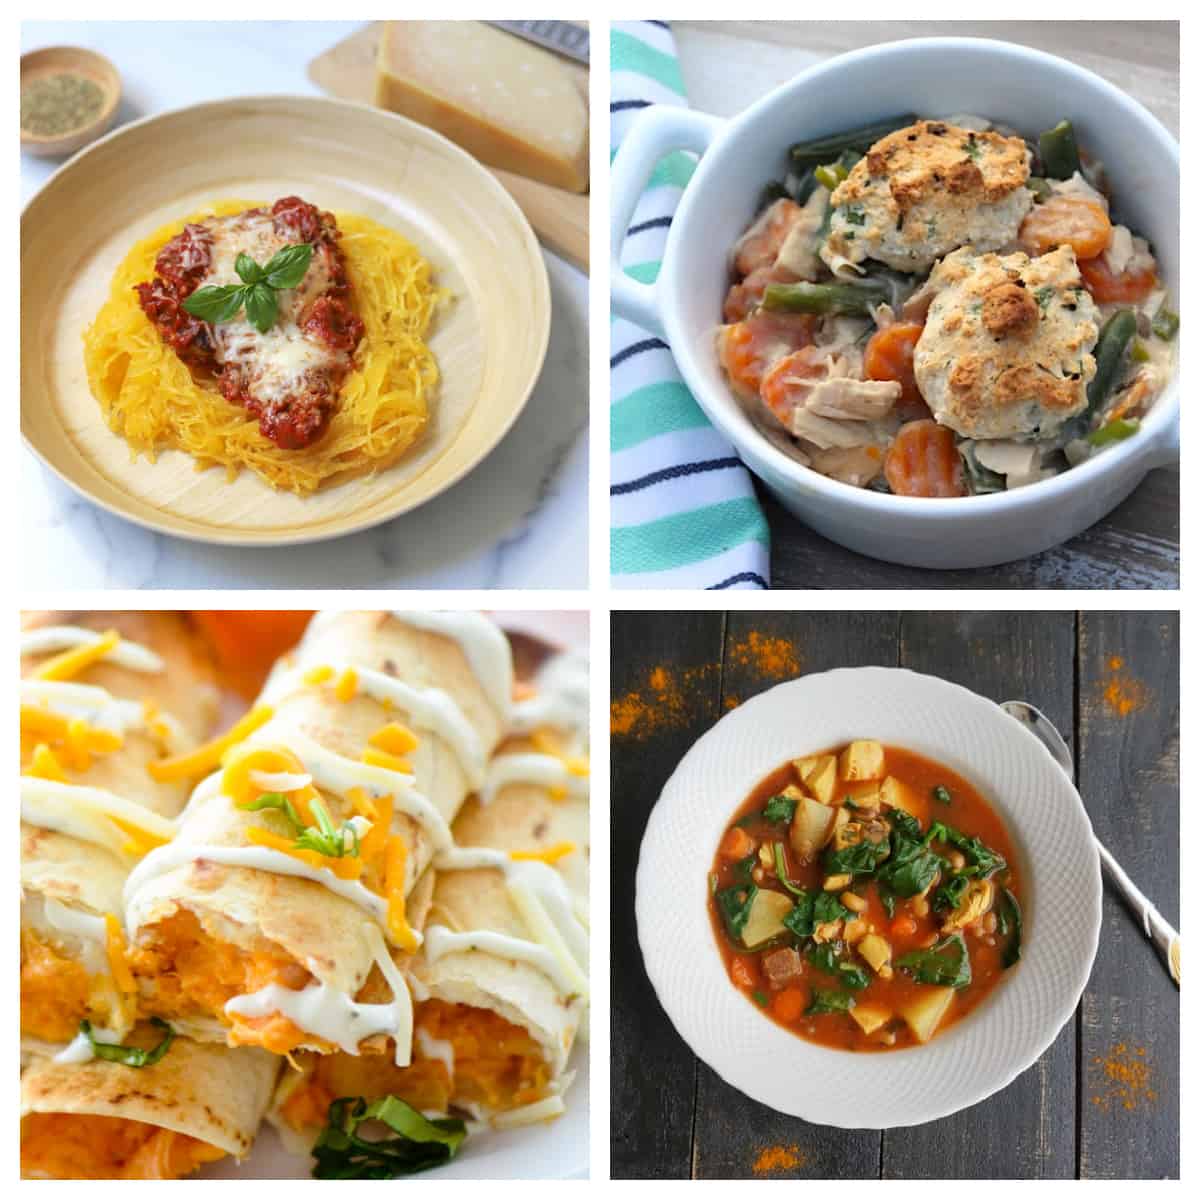 The 40 BEST Weight Watchers Recipes - GypsyPlate